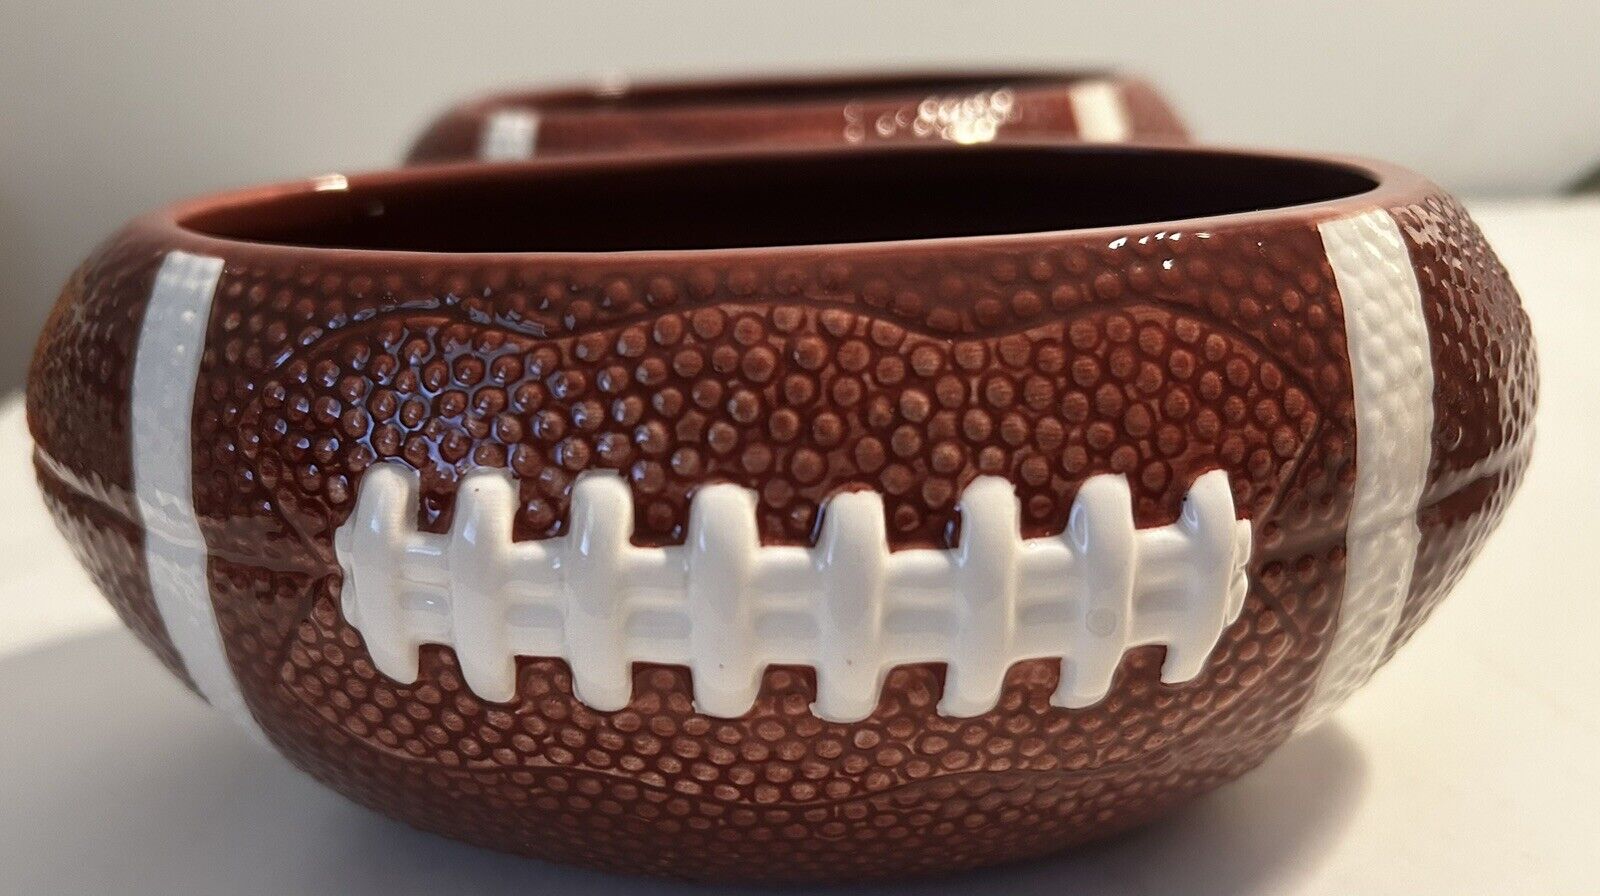 2 Ceramic Football Planter’, Serving Dish, Candy Dish  7in  Length, 3 In Height